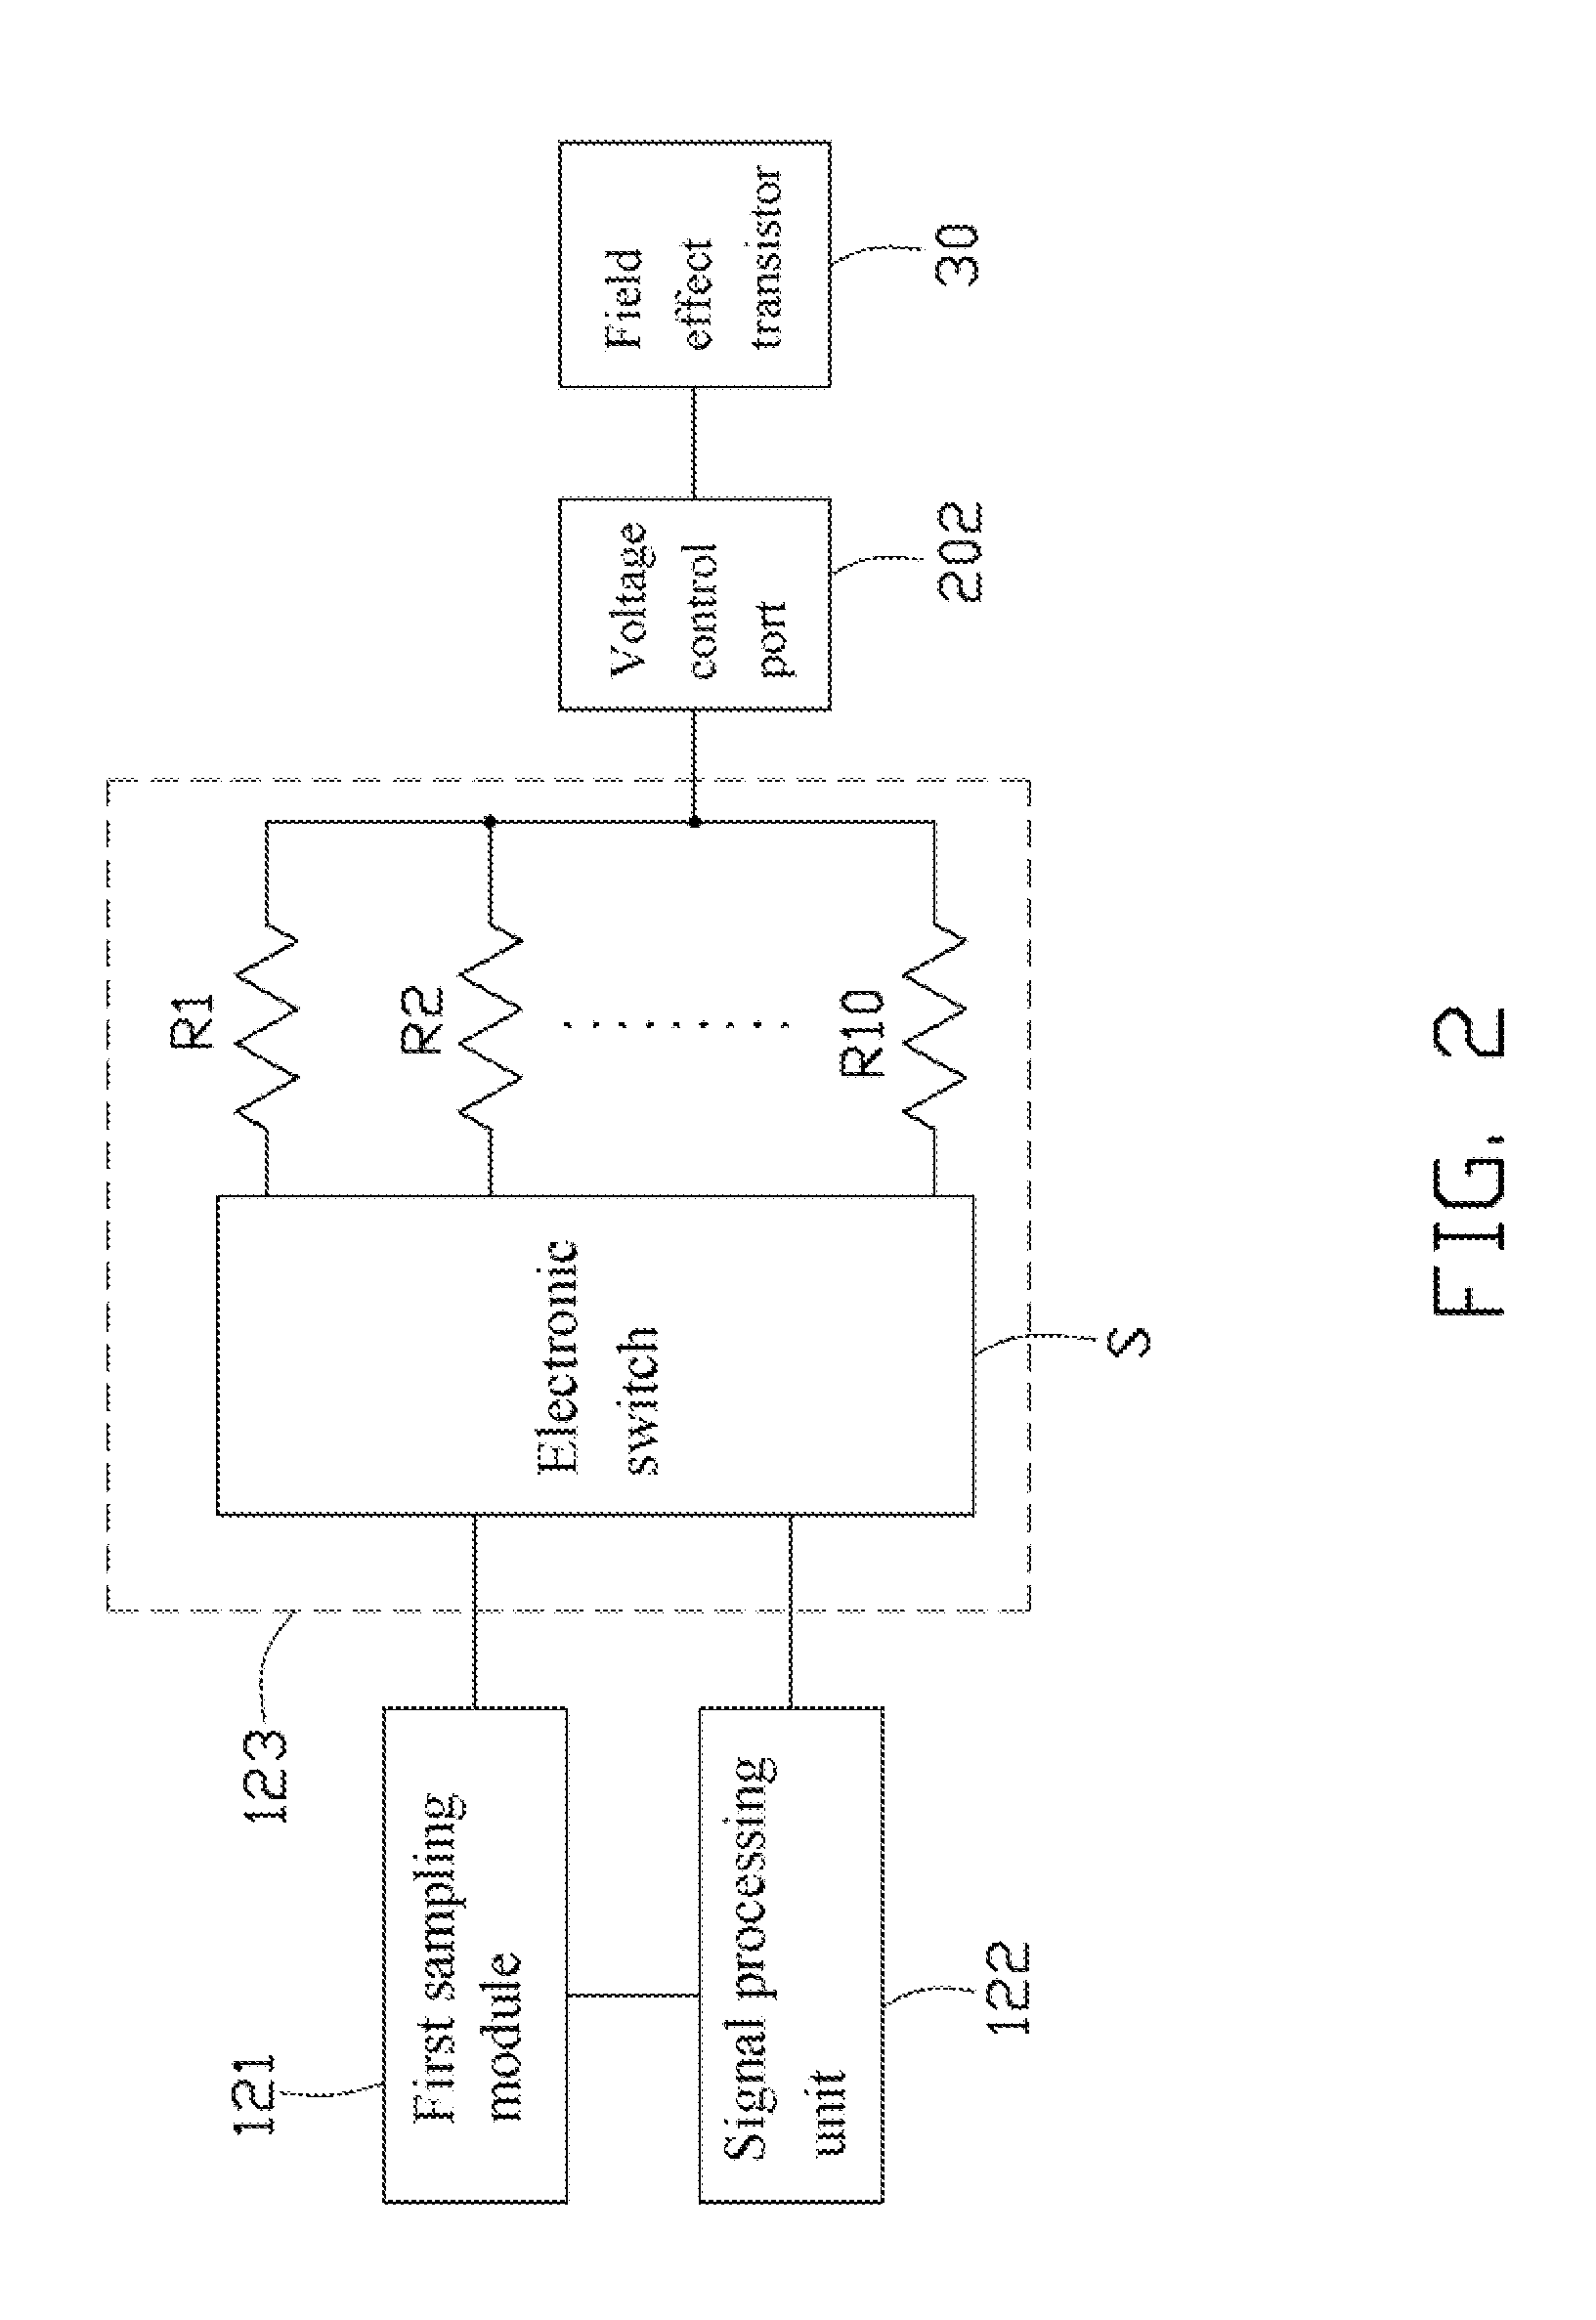 Voltage regulation device and system employing the same